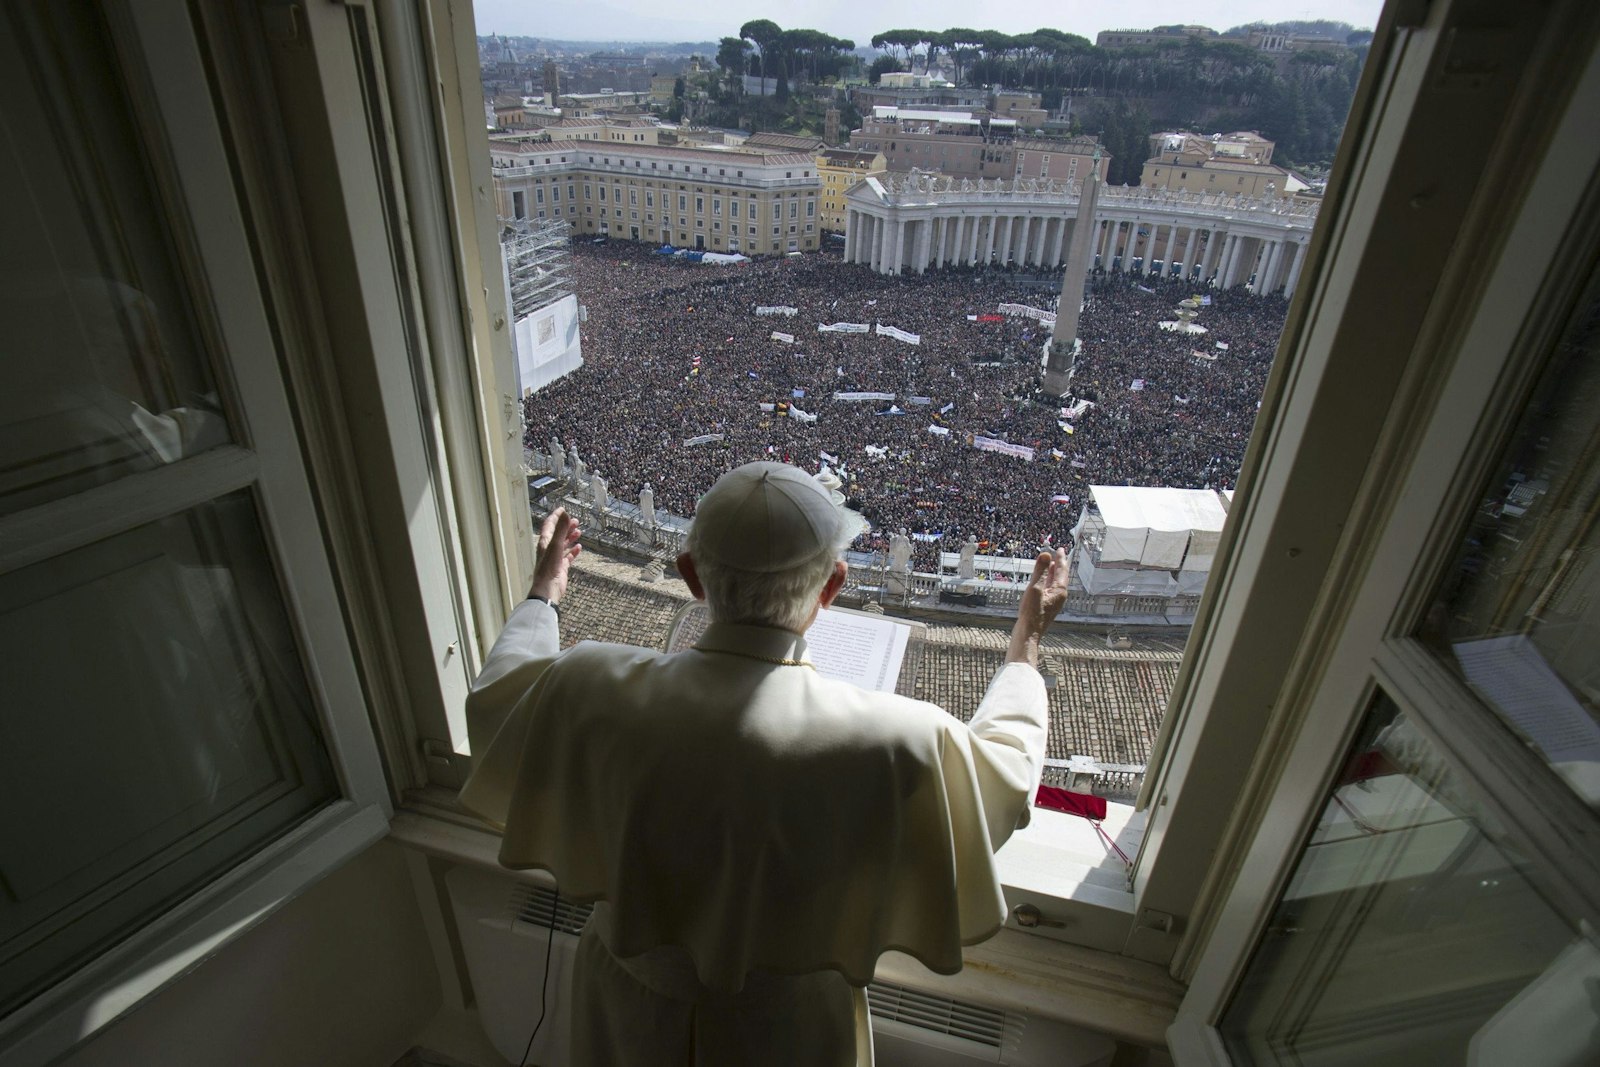 Pope Benedict XVI leads his last public Angelus from the window of his apartment overlooking St. Peter's Square at the Vatican Feb. 24, 2013. The pope surprised the world when he announced Feb. 11, 2013, that he was resigning the papacy. (CNS photo/Vatican Media)